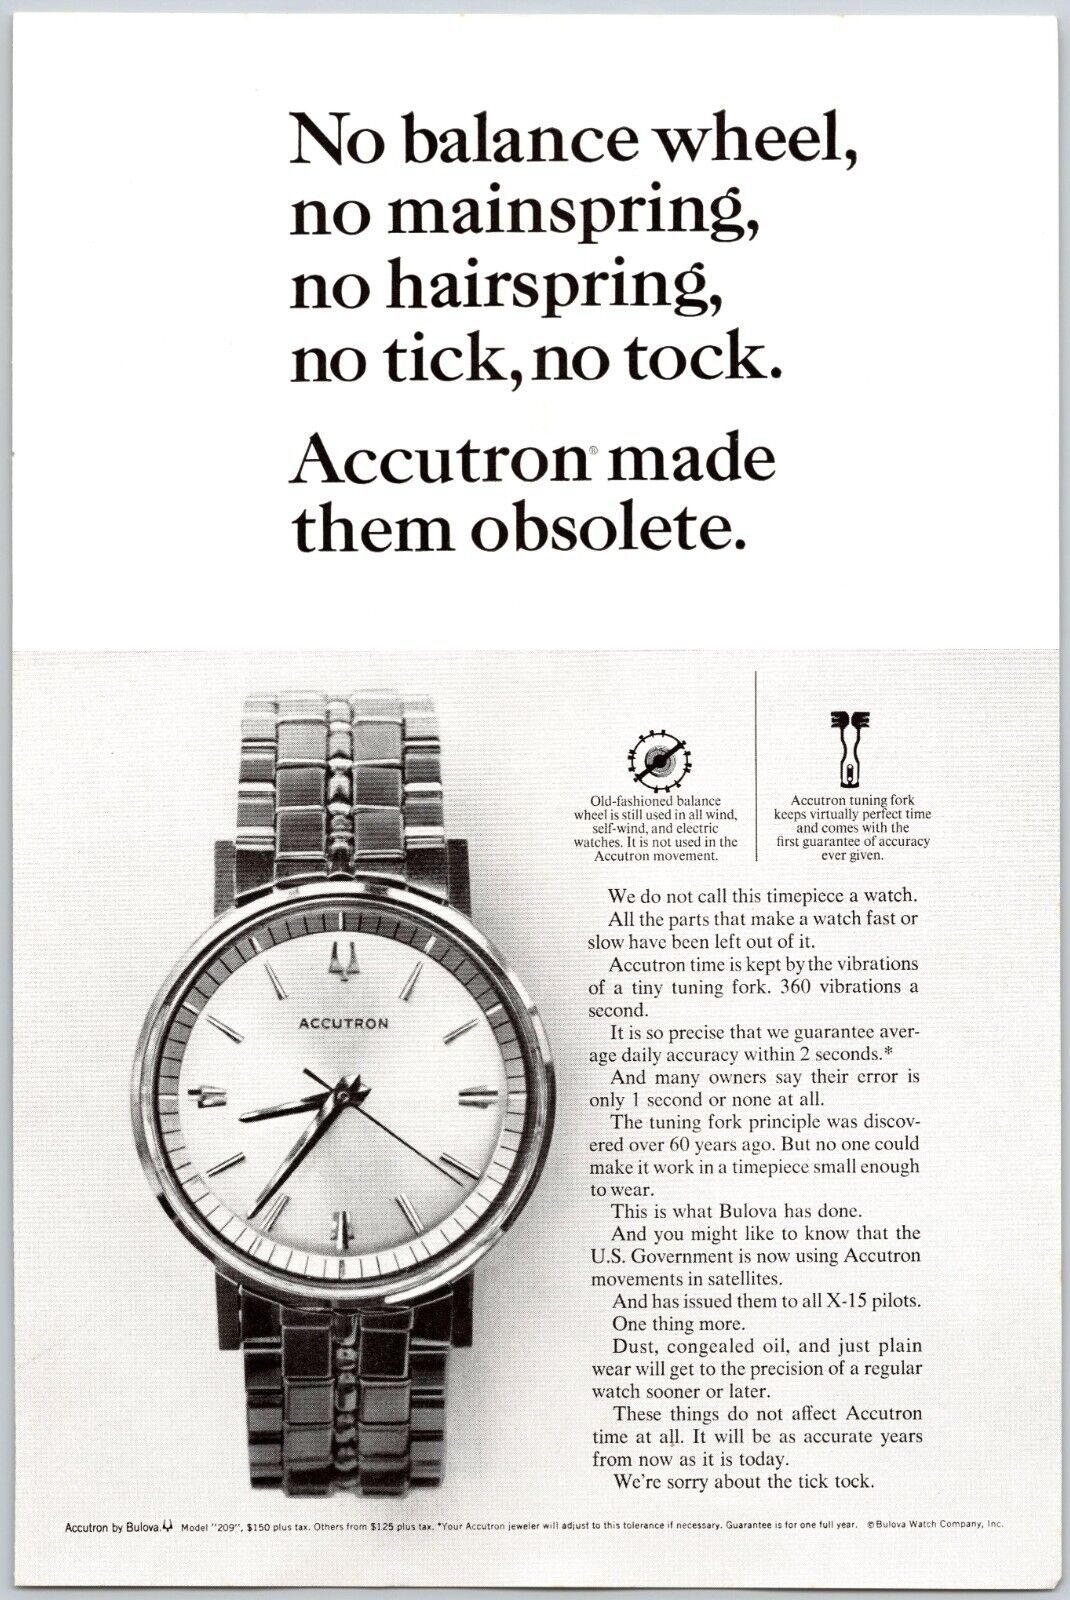 1964 Bulova Accutron Watch Vibrations Of A Tiny Tuning Fork Vintage Print Ad